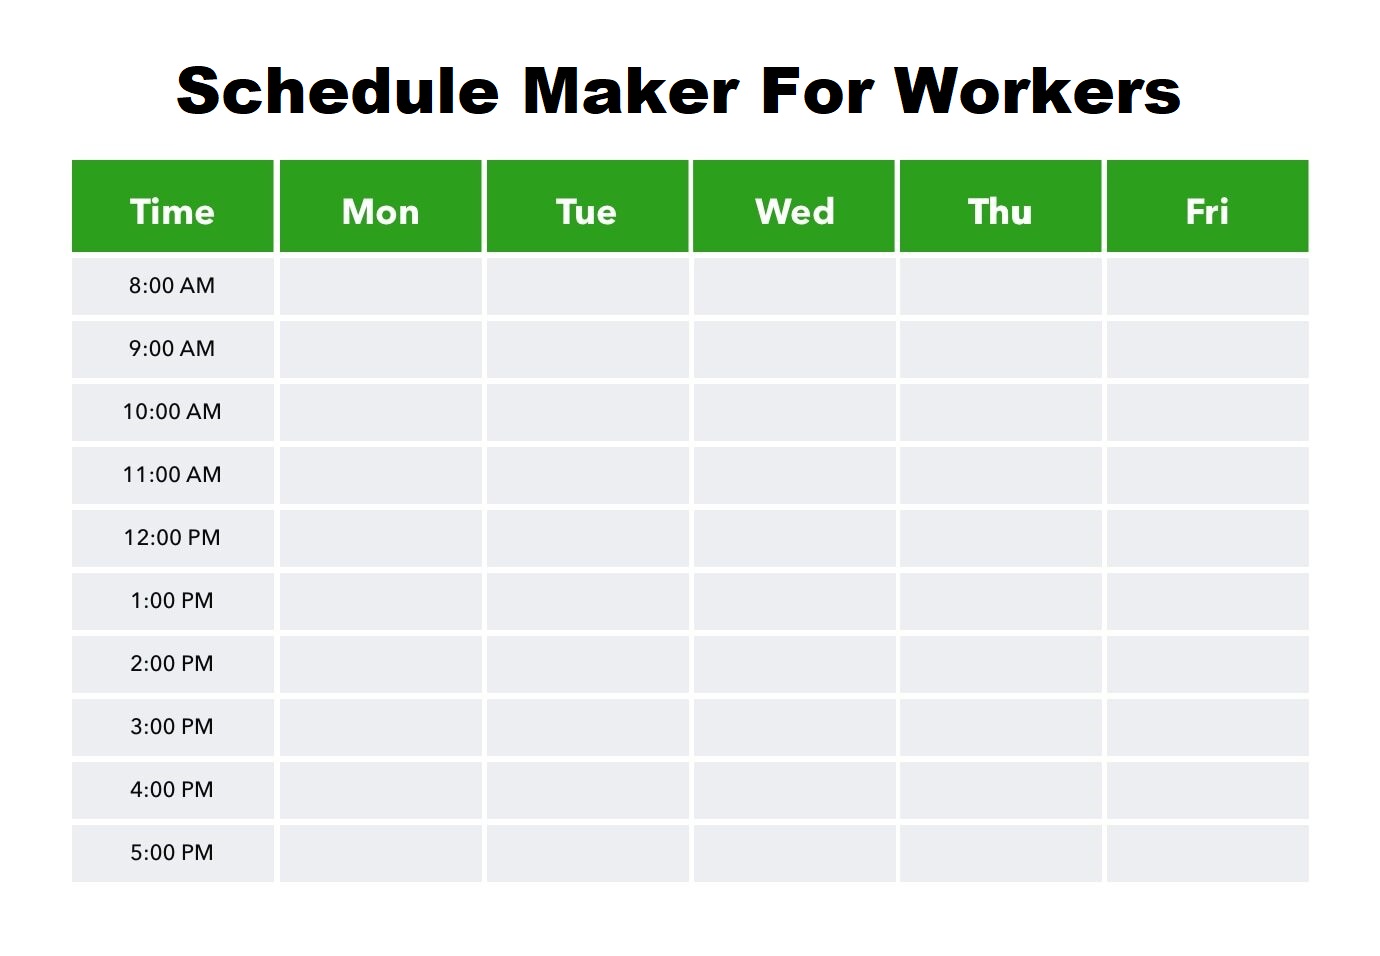 Schedule Maker For Workers